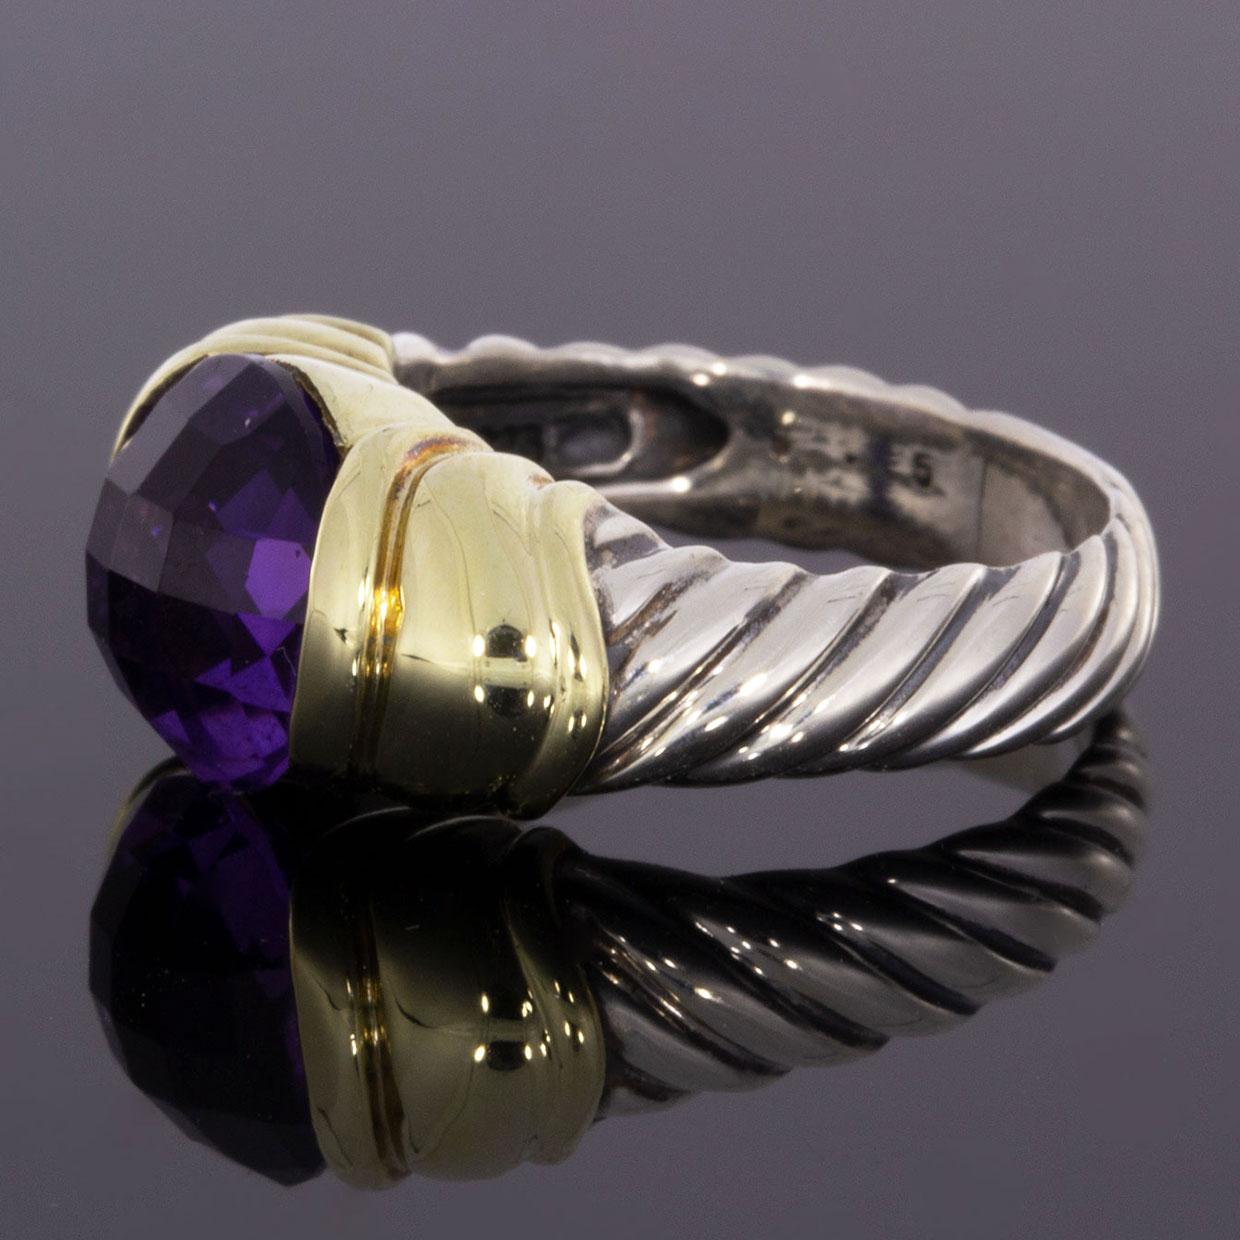 Item Details:
Estimated Retail - $695.00
Brand - David Yurman
Collection - Capri
Metal - 14K Yellow Gold & Sterling Silver
Ring Size - 6.50
Sizable - Yes
Colored Stone Color - Purple

Stone 1 Information:
Stone Type - Amethyst
Stone Shape - Round